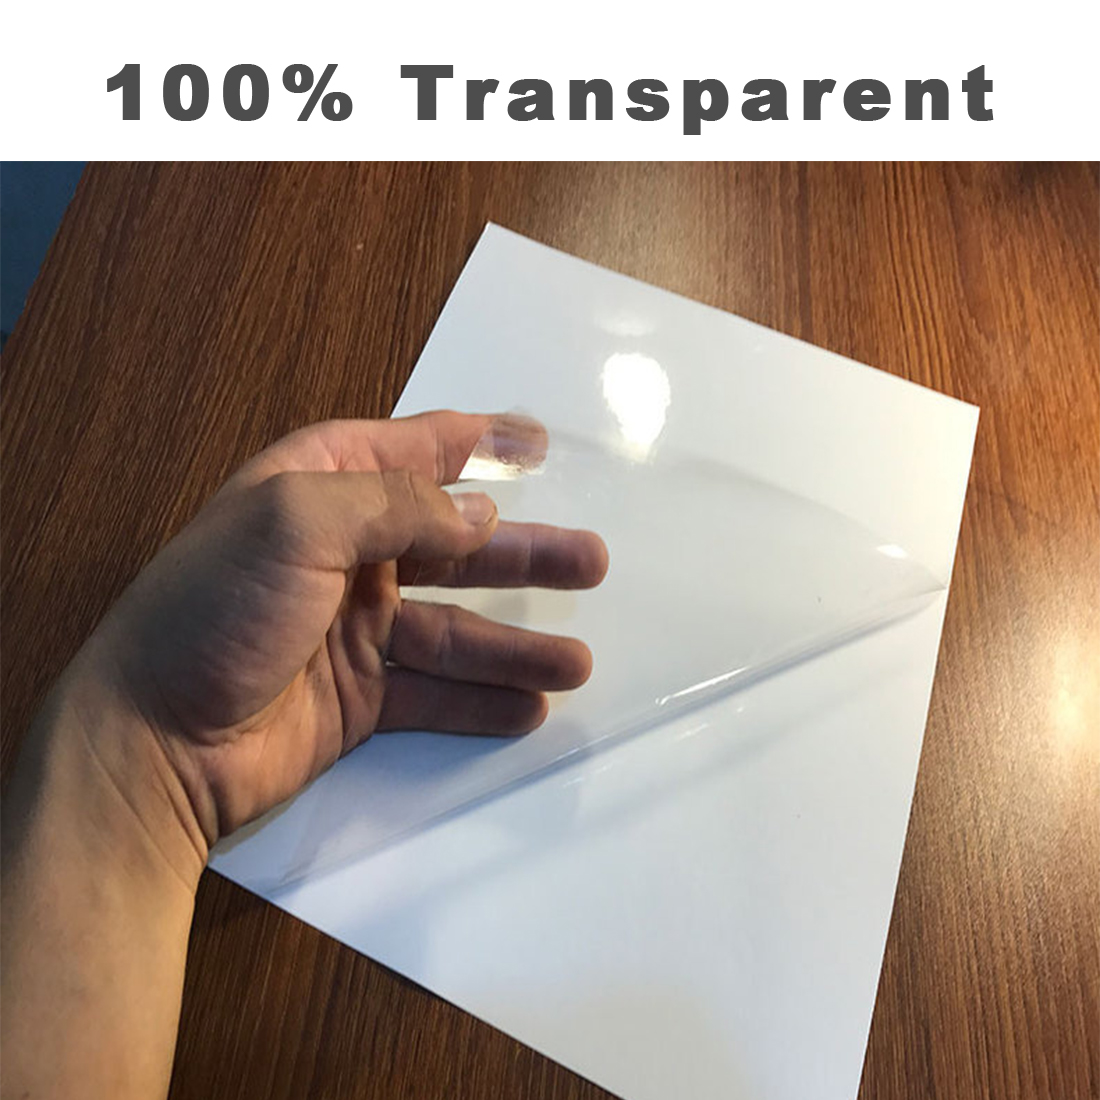 A4 Transparent Clear Glossy Sticker Paper Label for inkjet printer